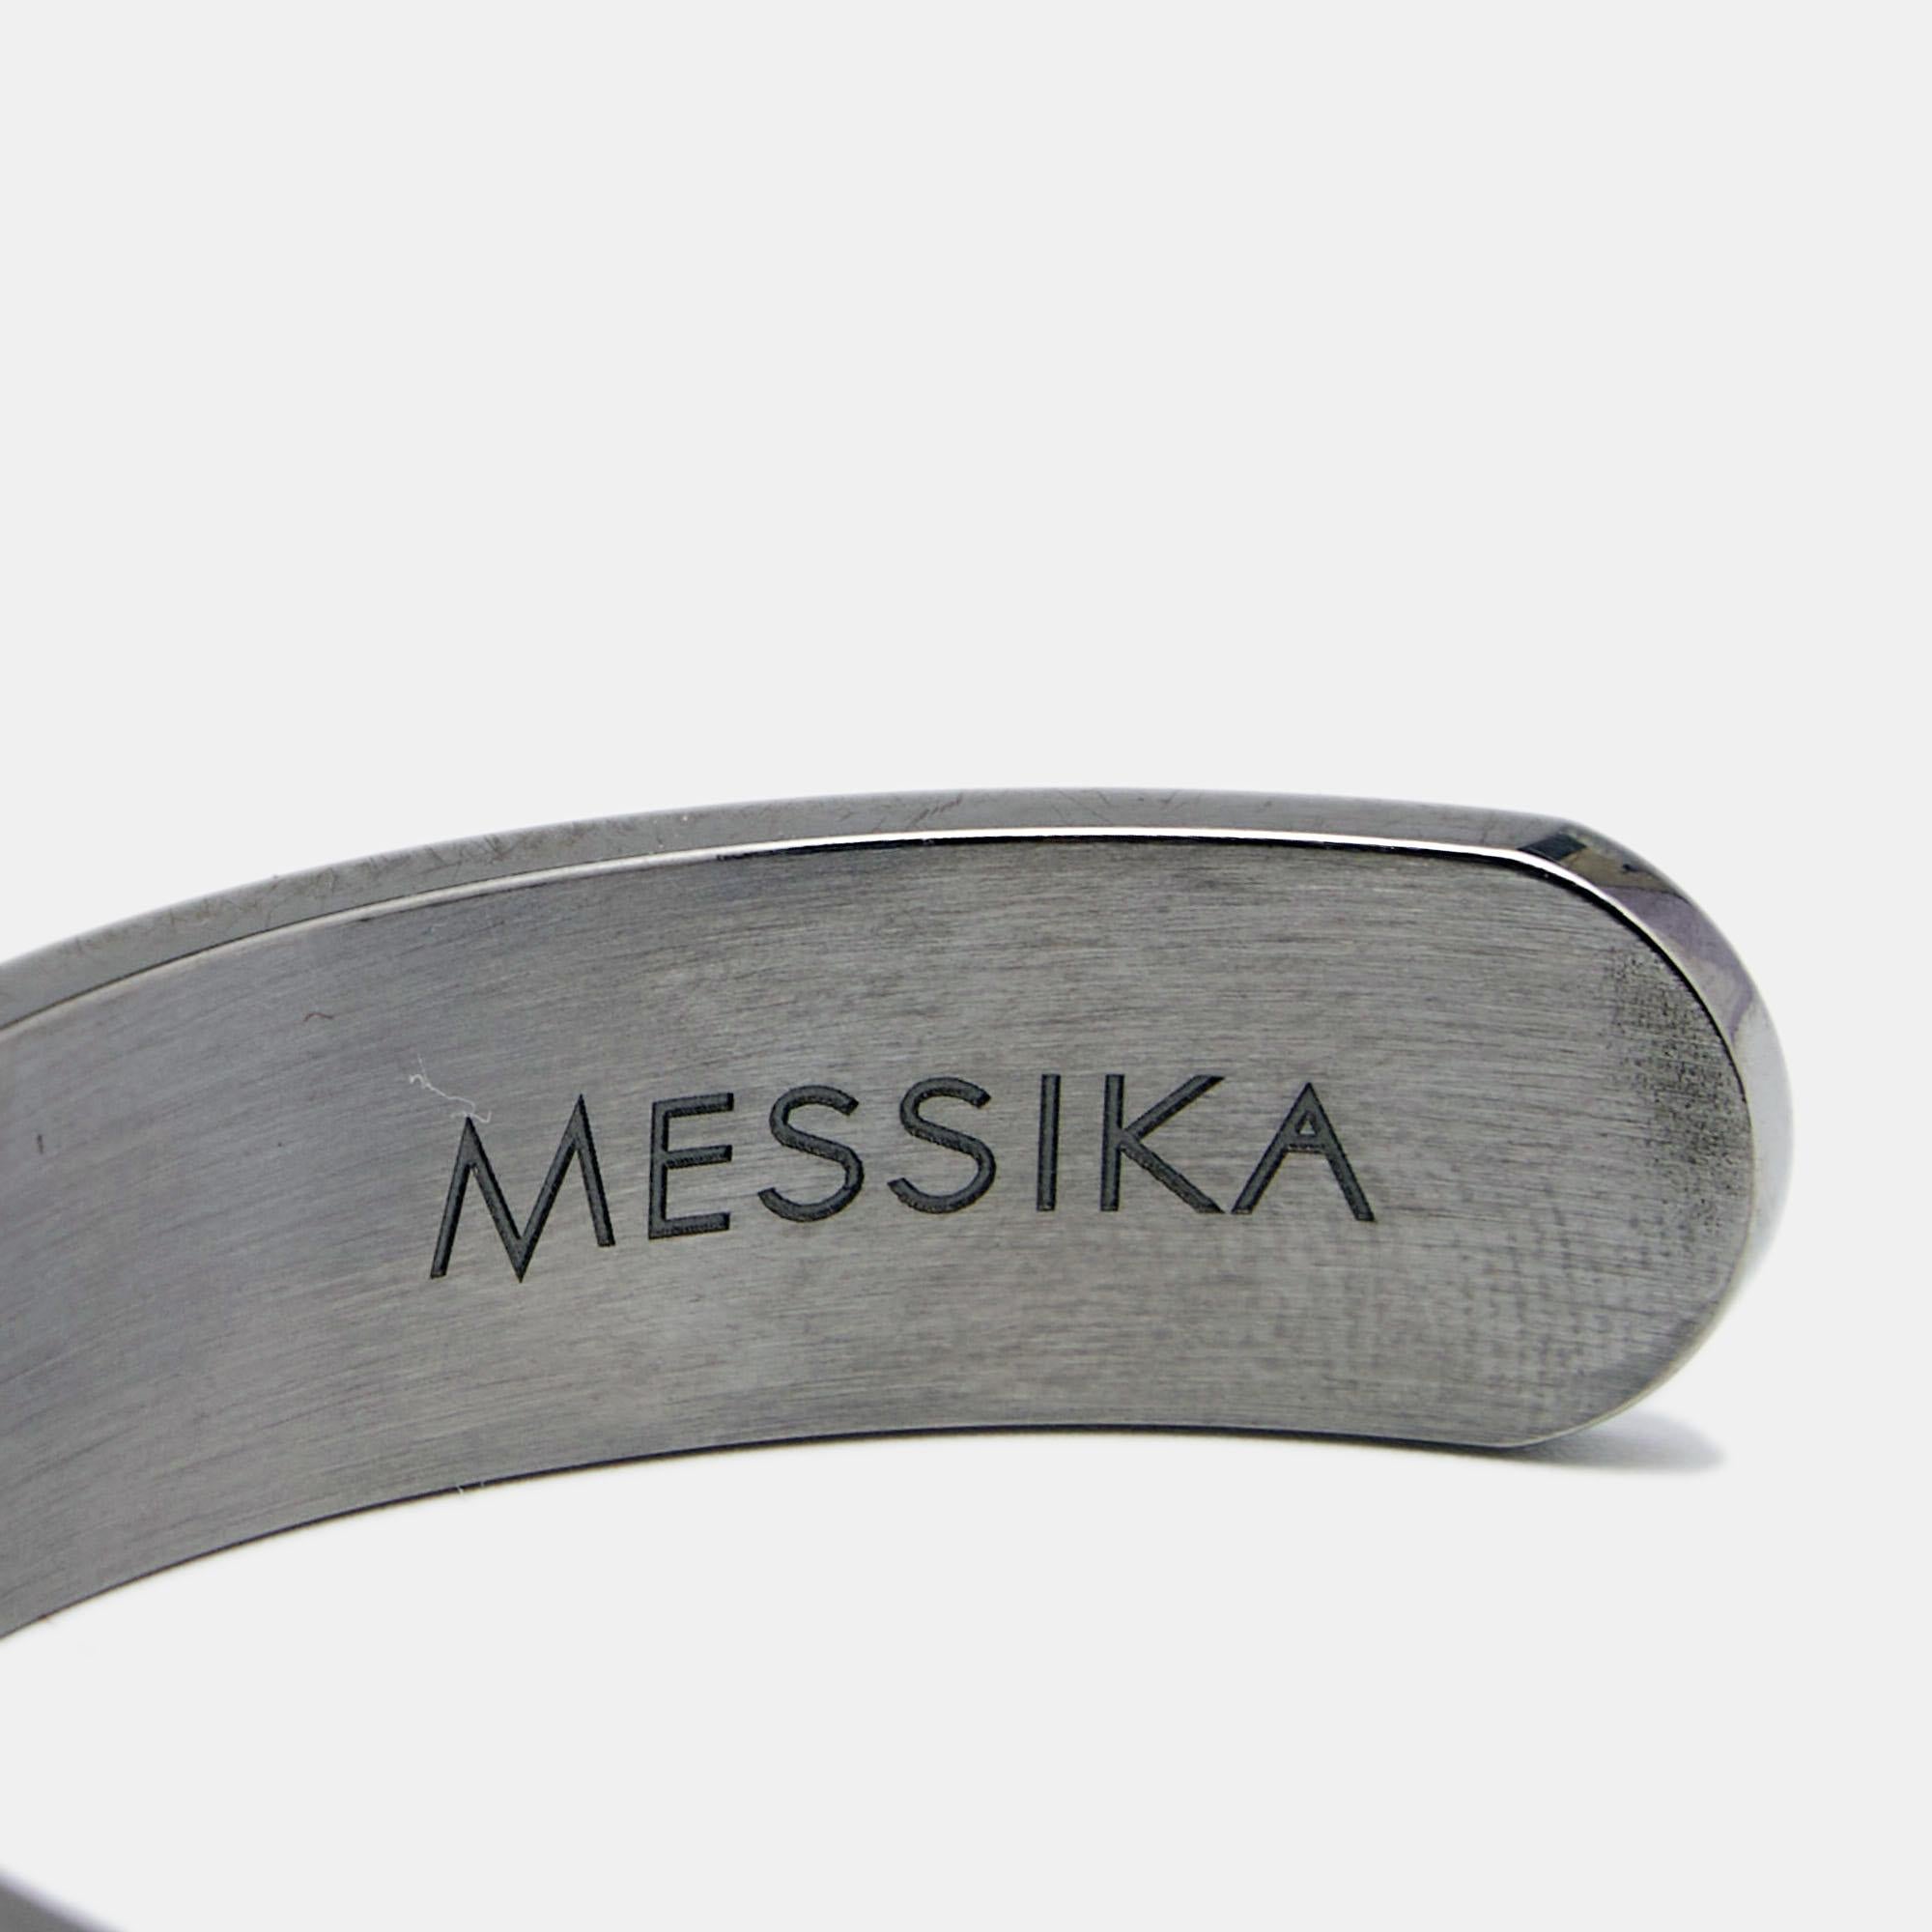 Move is an iconic collection of house Messika, a line that embodies elegance in simple designs. This bold bracelet is crafted from titanium into an open cuff silhouette and centered with a cage that holds three diamonds.

Includes: Original Box,